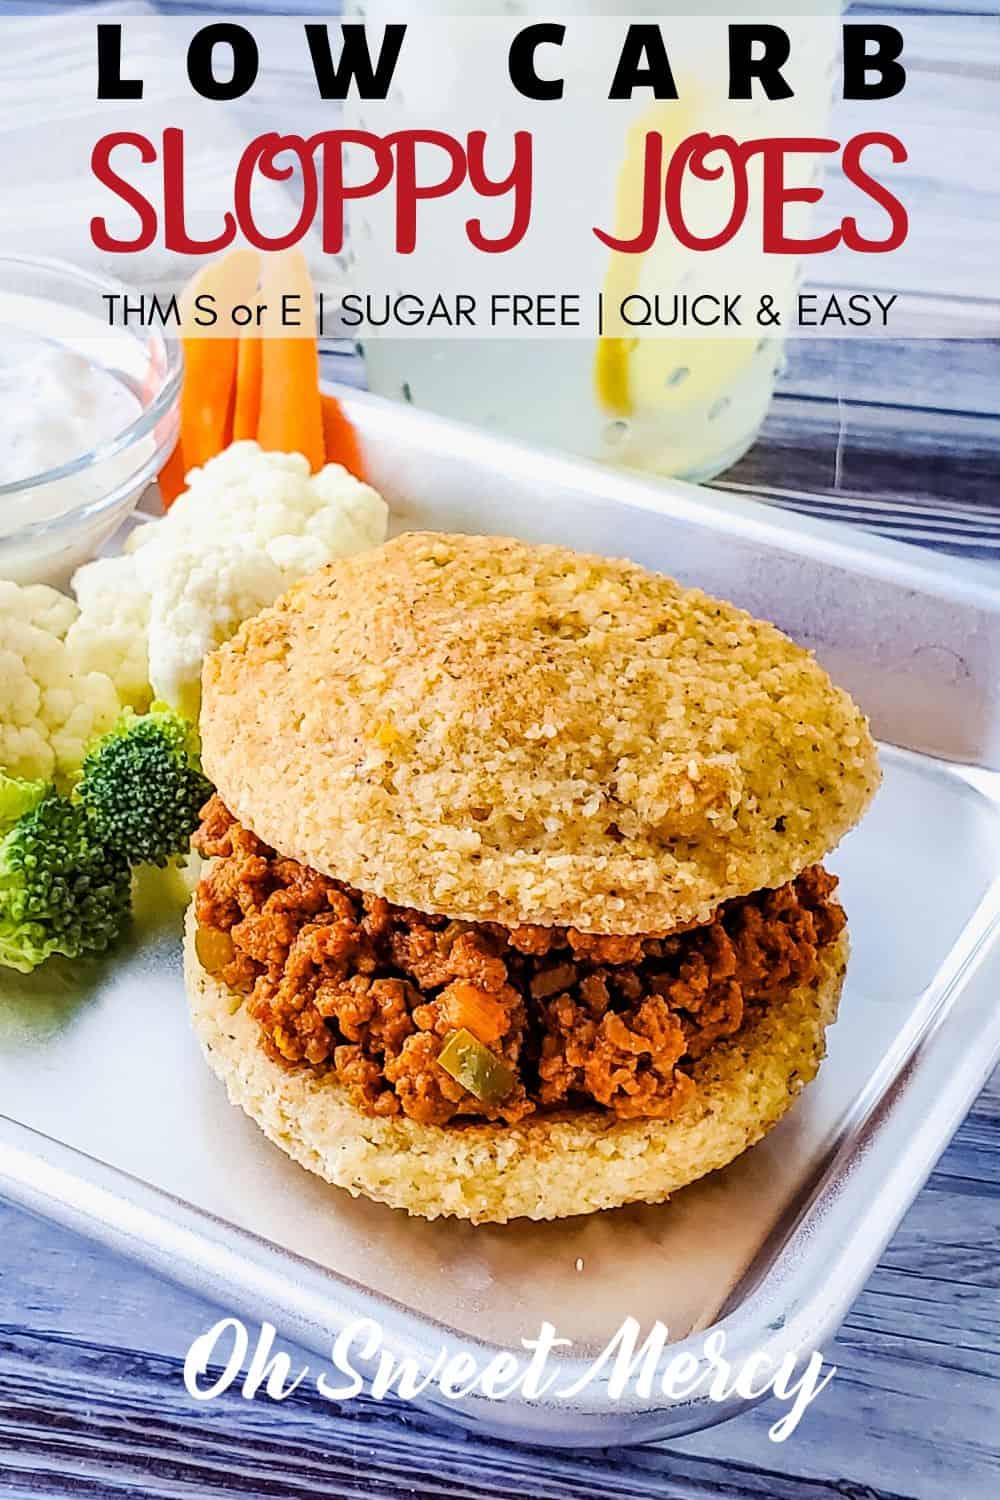 A little bit sweet, a little bit tangy, this easy low carb sloppy joe recipe is on the table in about 25 minutes. Trim Healthy Mamas, easily convert it for a THM E meal, too! Big list of on plan breads and sides included. #lowcarb #thm #keto #sugarfree #easy #homemade #sloppyjoe #mealprep @ohsweetmercy